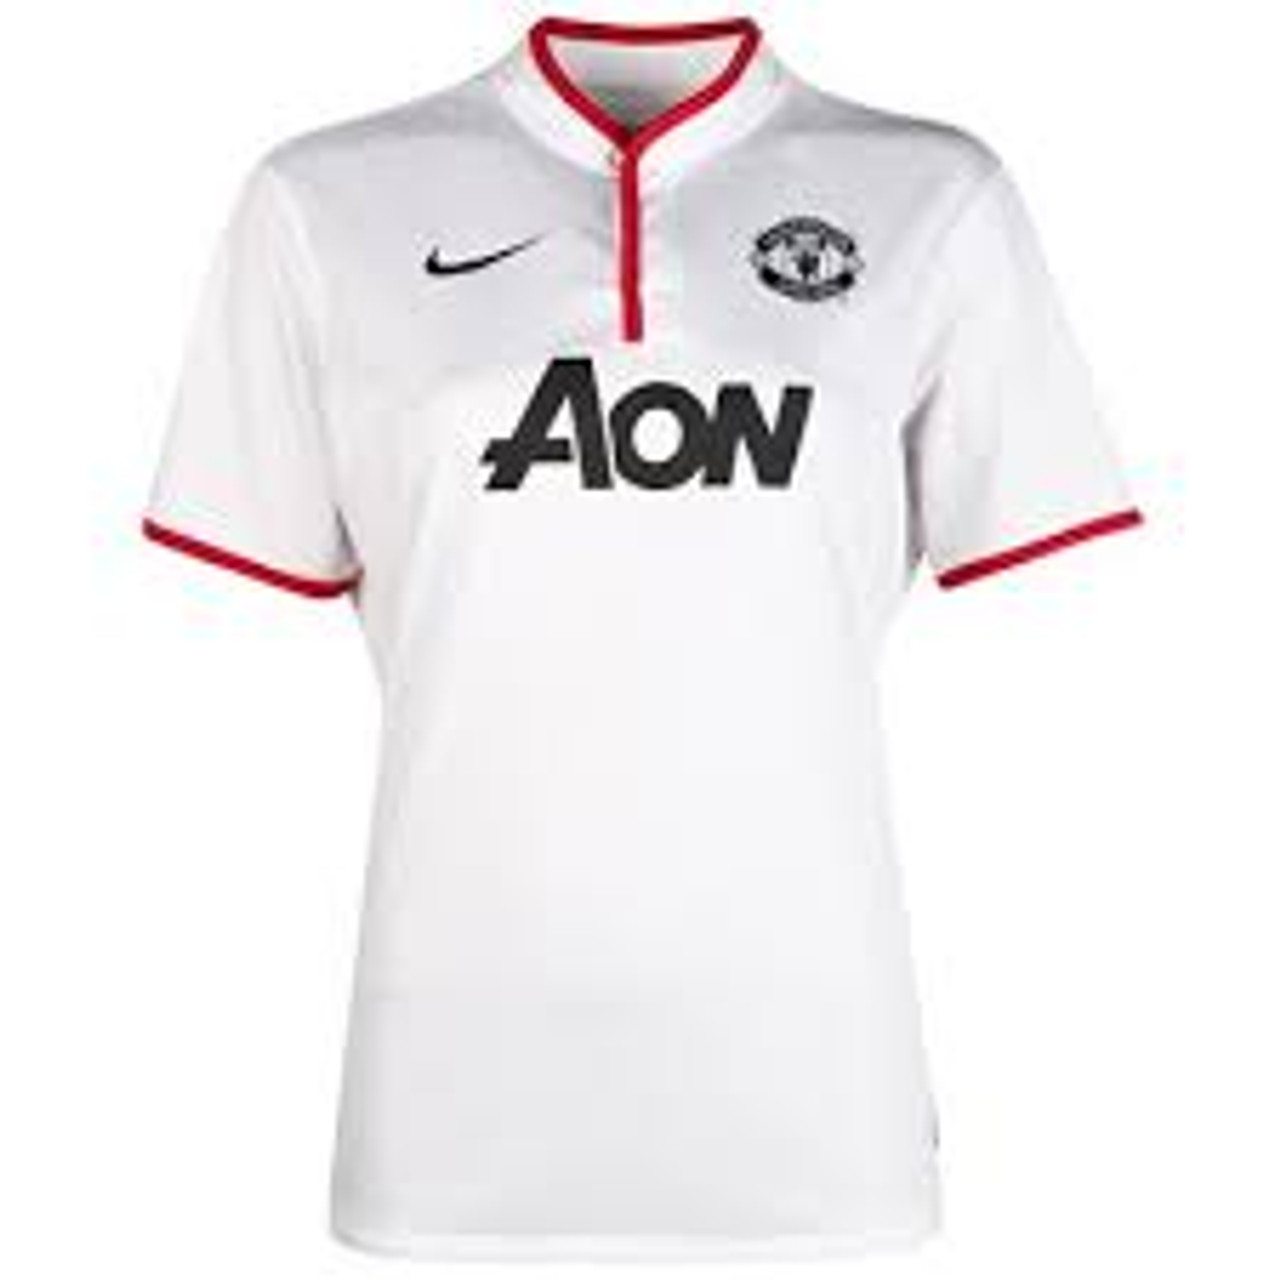 manchester united aon white jersey